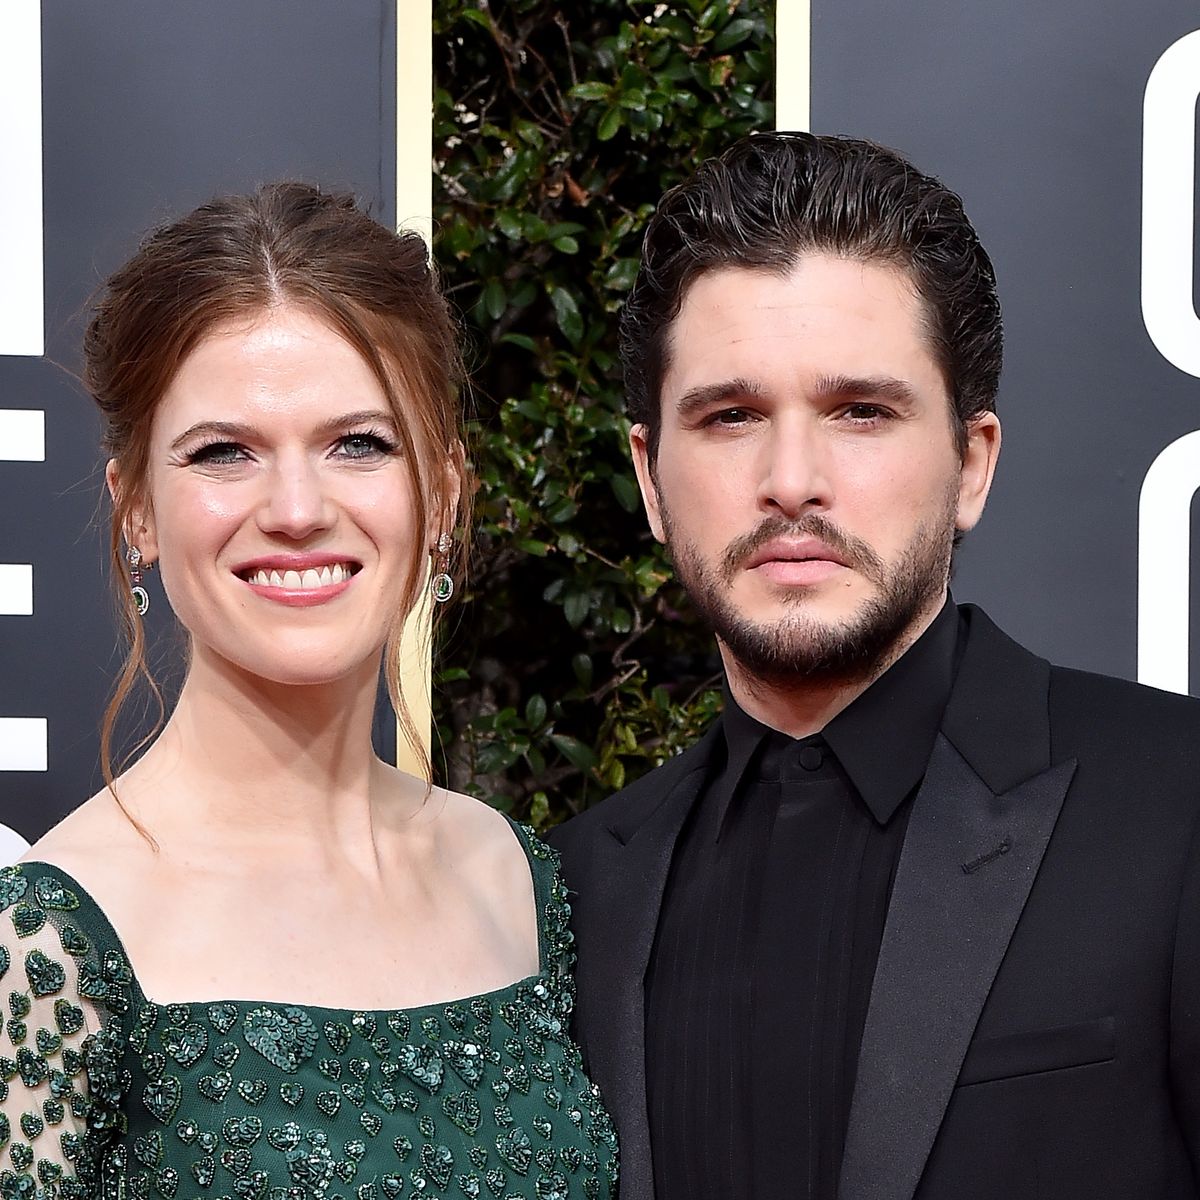 Read more about the article ‘Game Of Thrones’ actor Kit Harington shares uncommon knowledge about ‘Parenting’ with spouse Rose Leslie